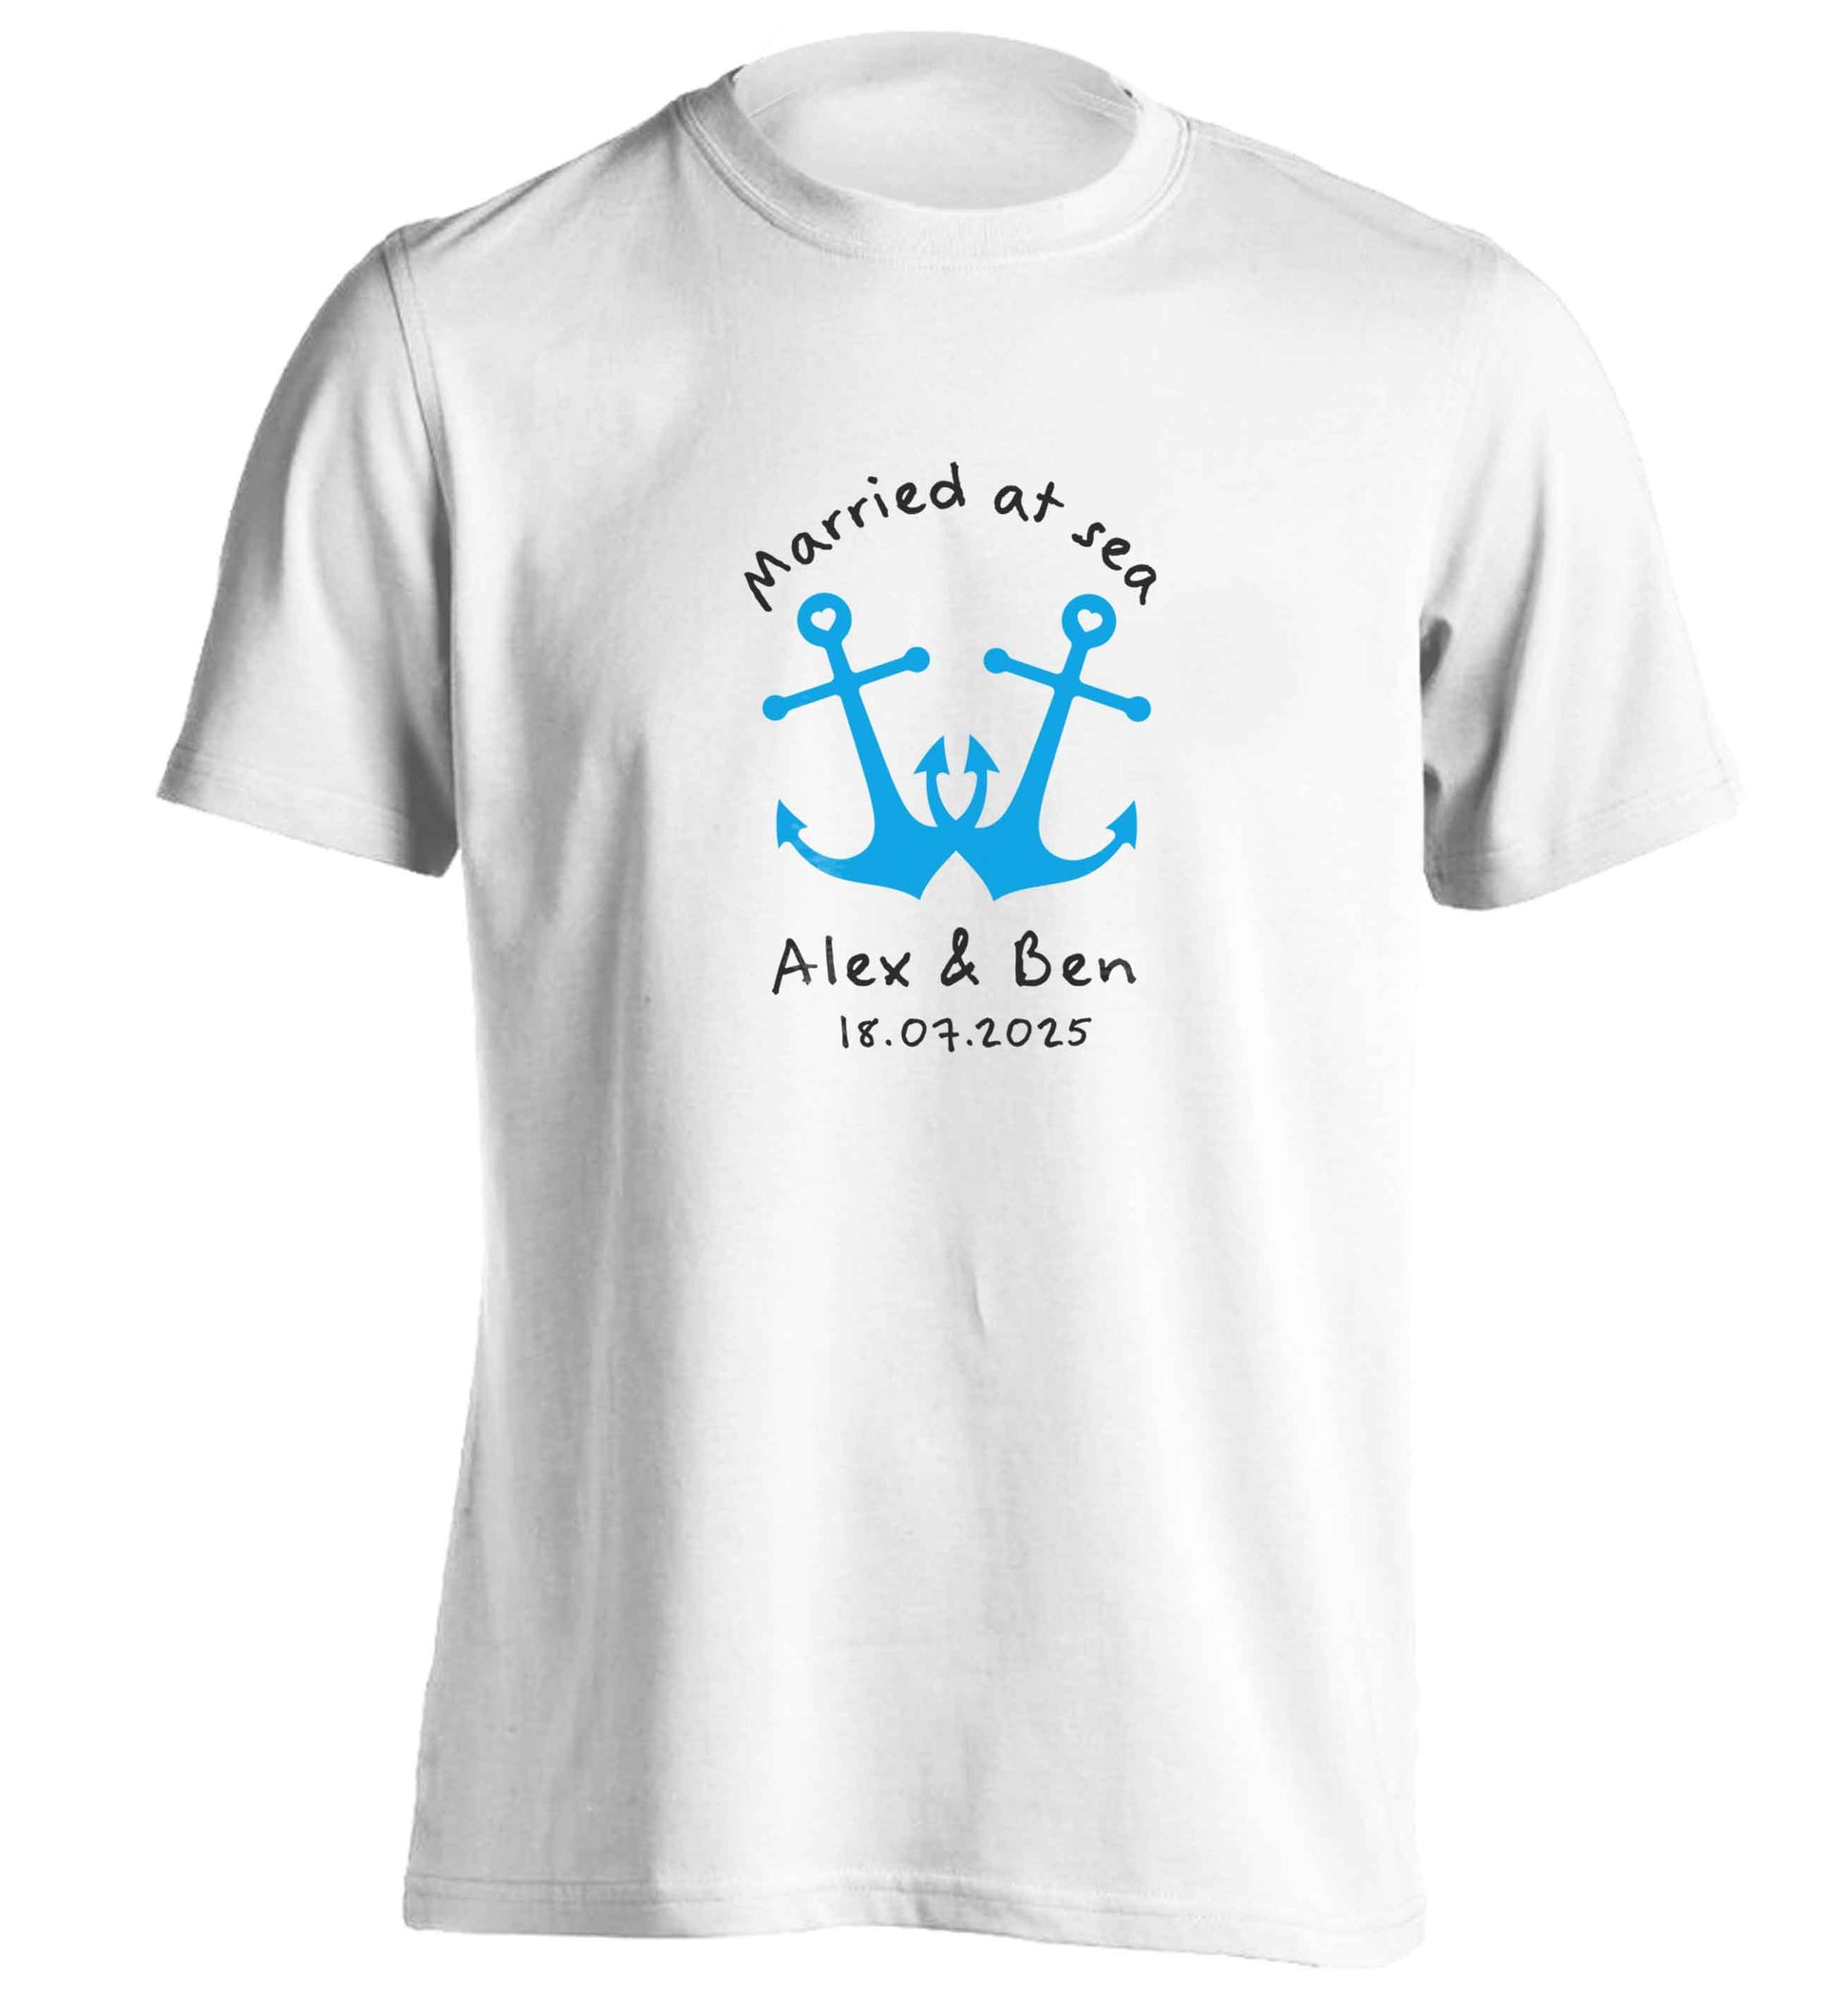 Married at sea blue anchors adults unisex white Tshirt 2XL